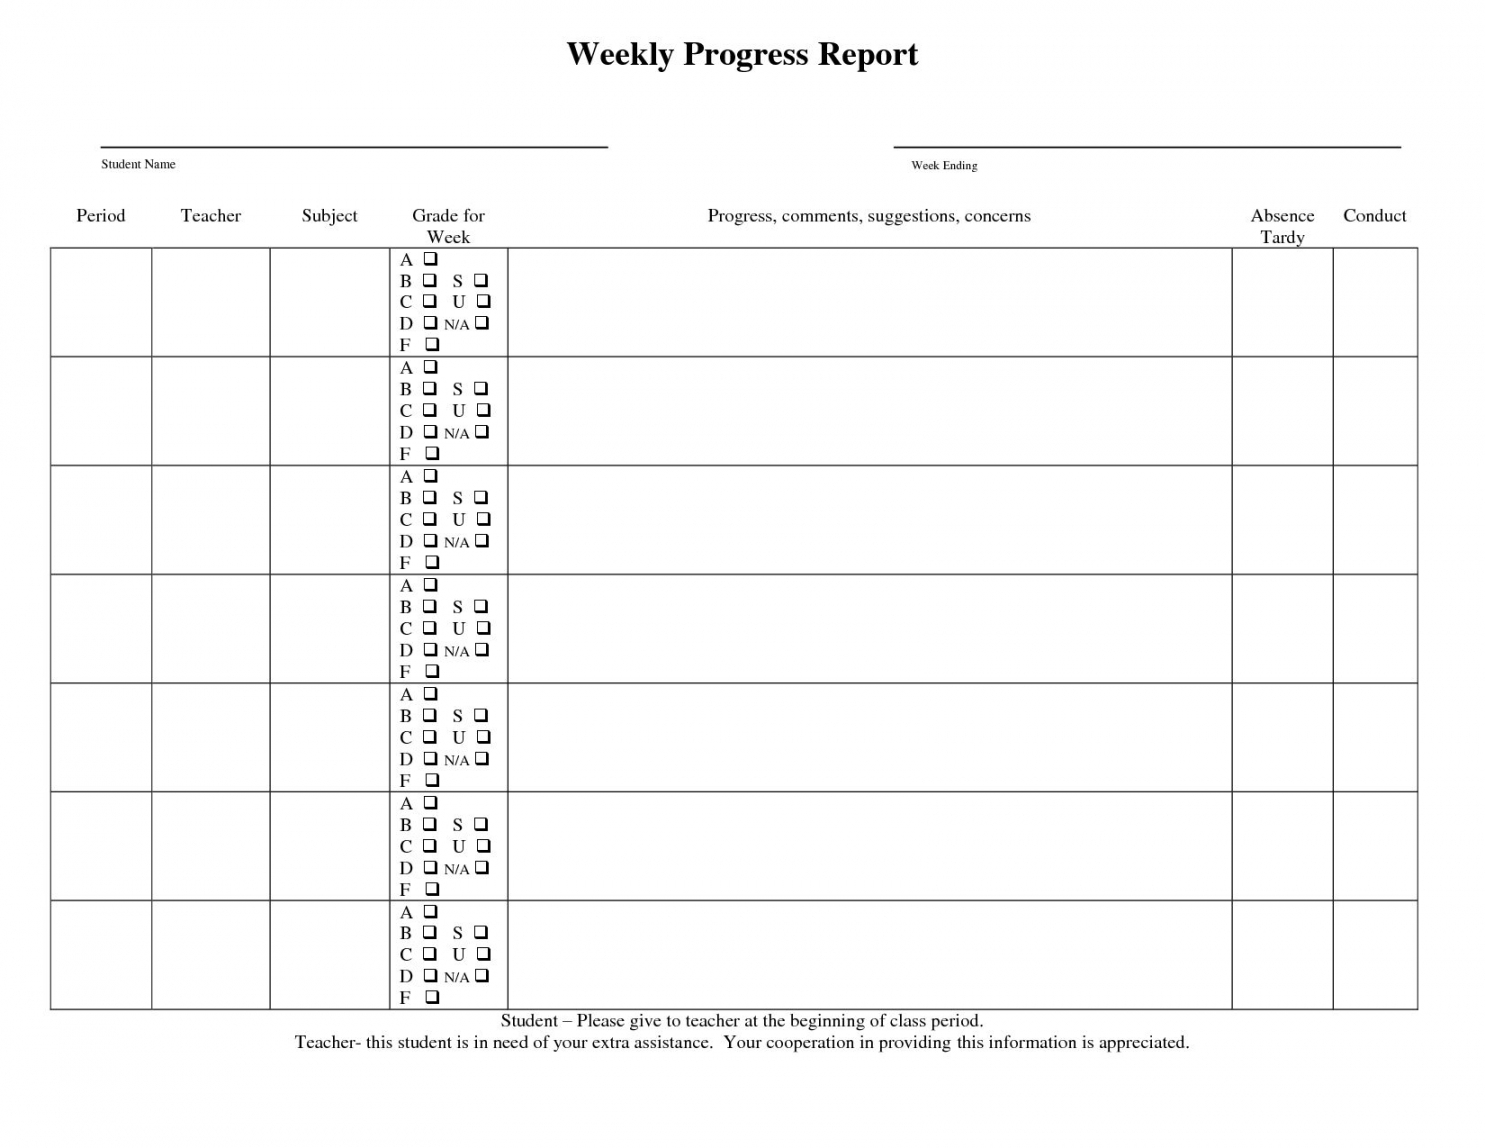 Daily Progress Report Format Excel Construction Glendale For Student Progress Report Template